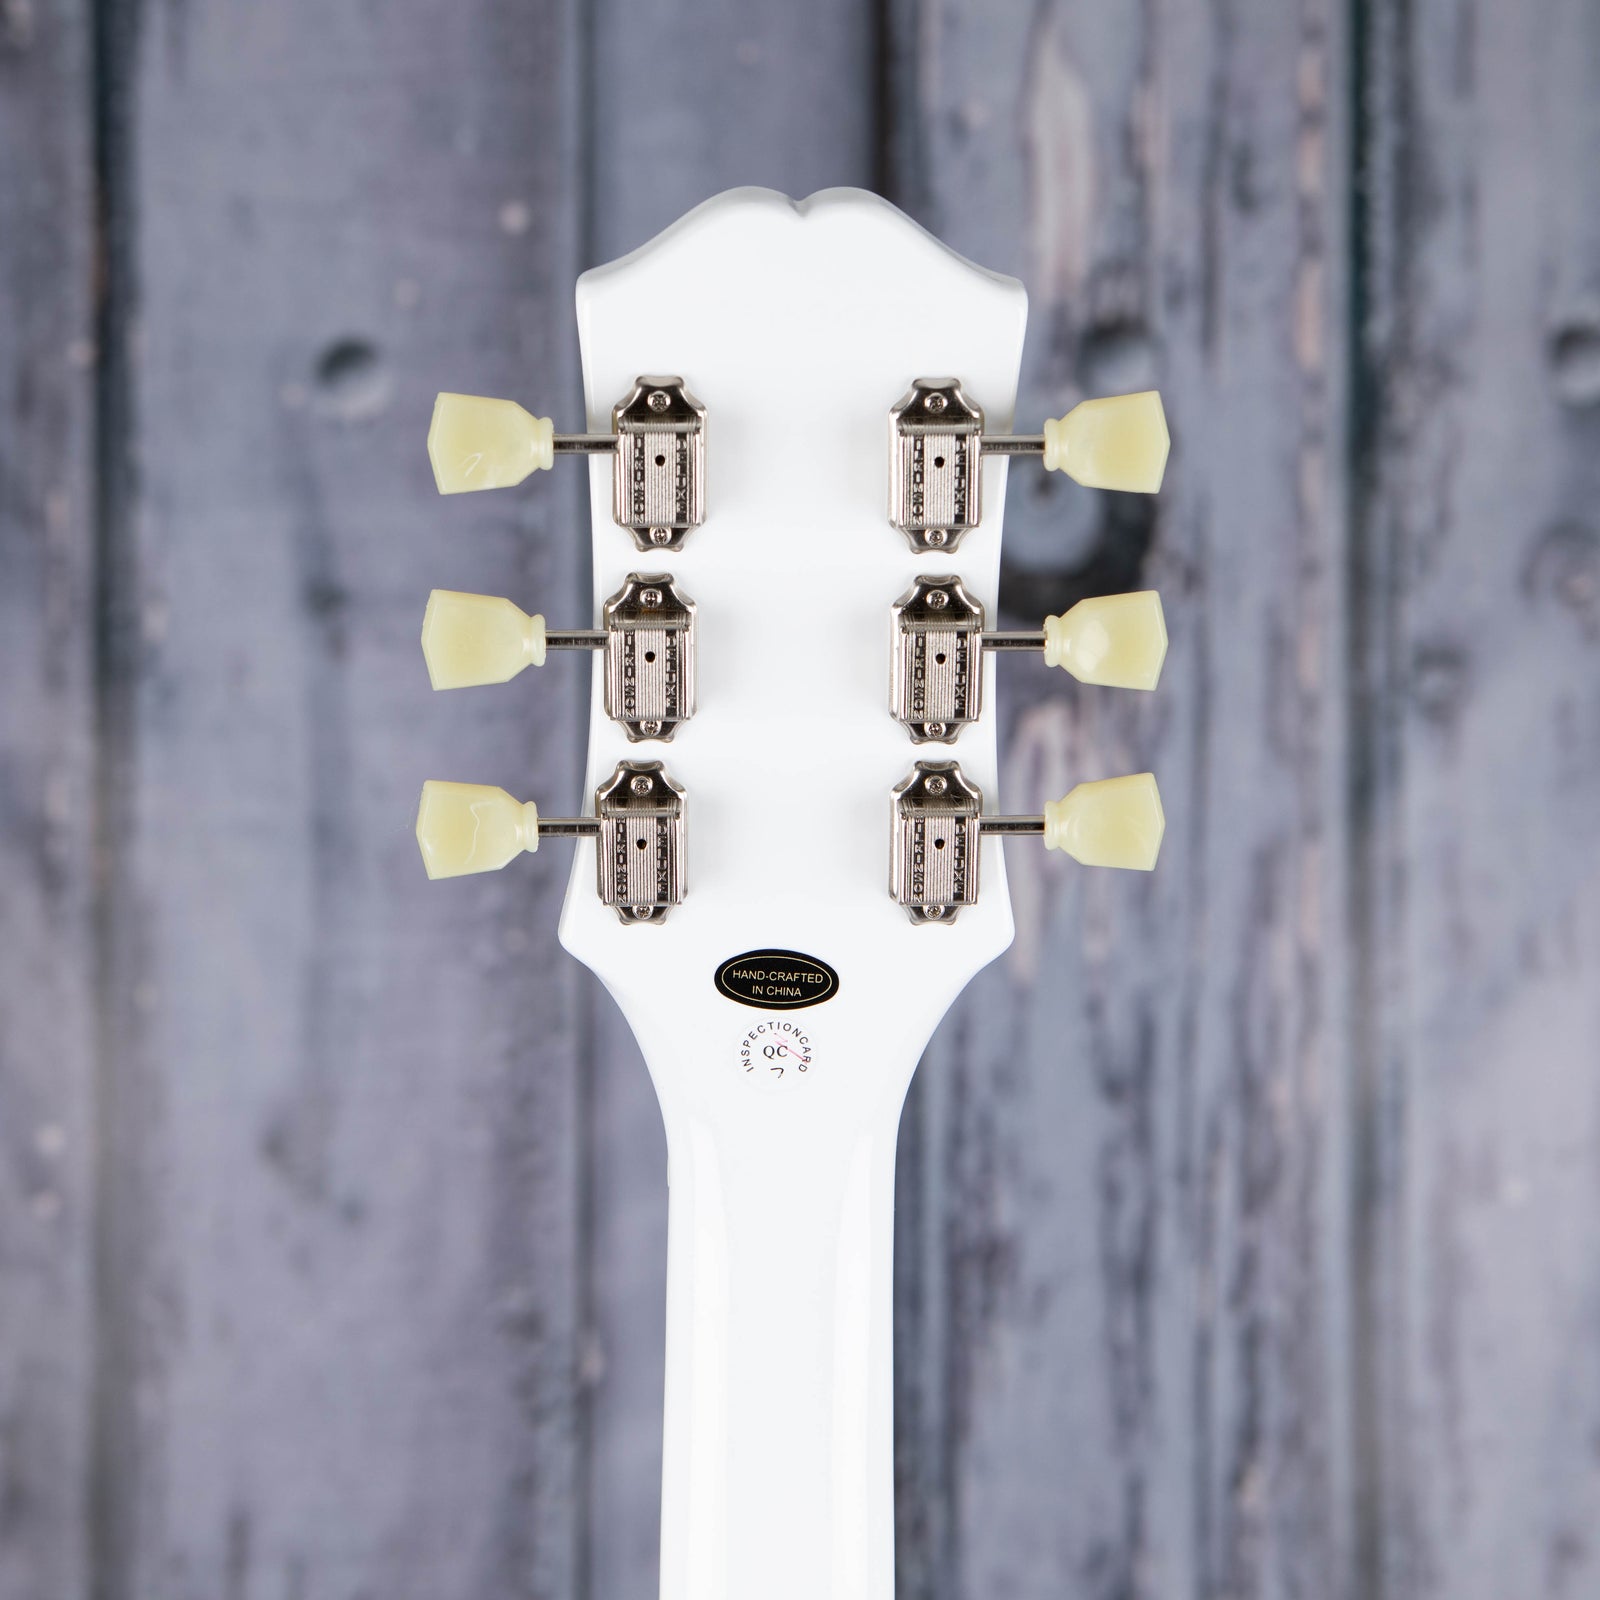 Epiphone SG Standard, Alpine White | For Sale | Replay Guitar Exchange